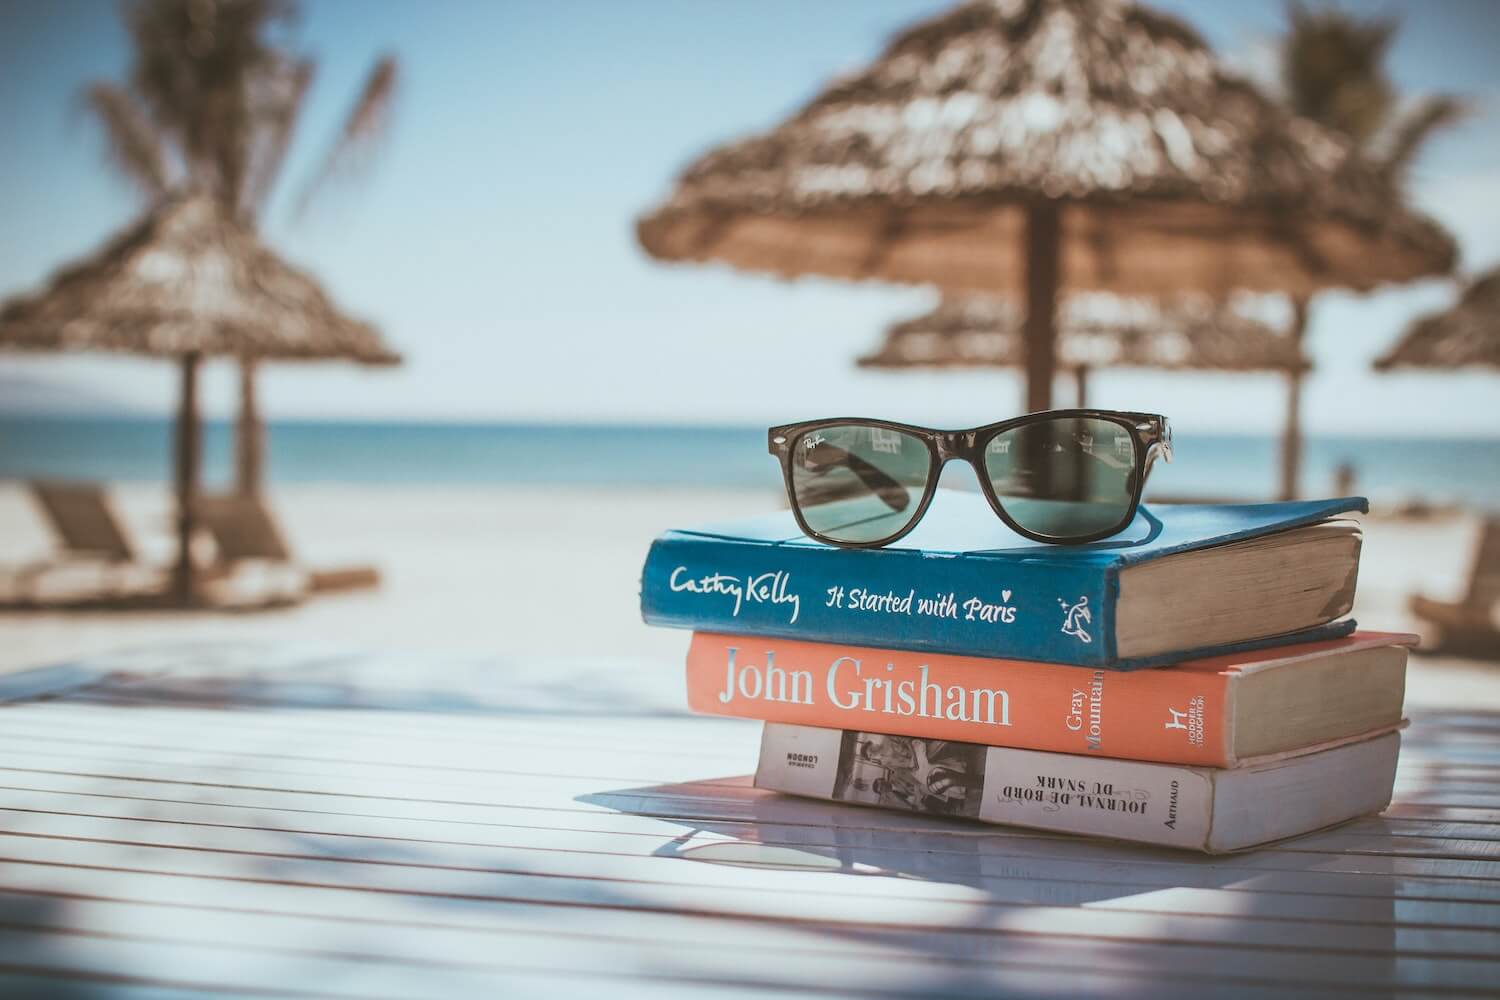 Audible FREE 30-day trial, 5 Reasons Why an Audible Subscription is worth it for Travelers, FREE audible subscription, books by the beach, carrying books